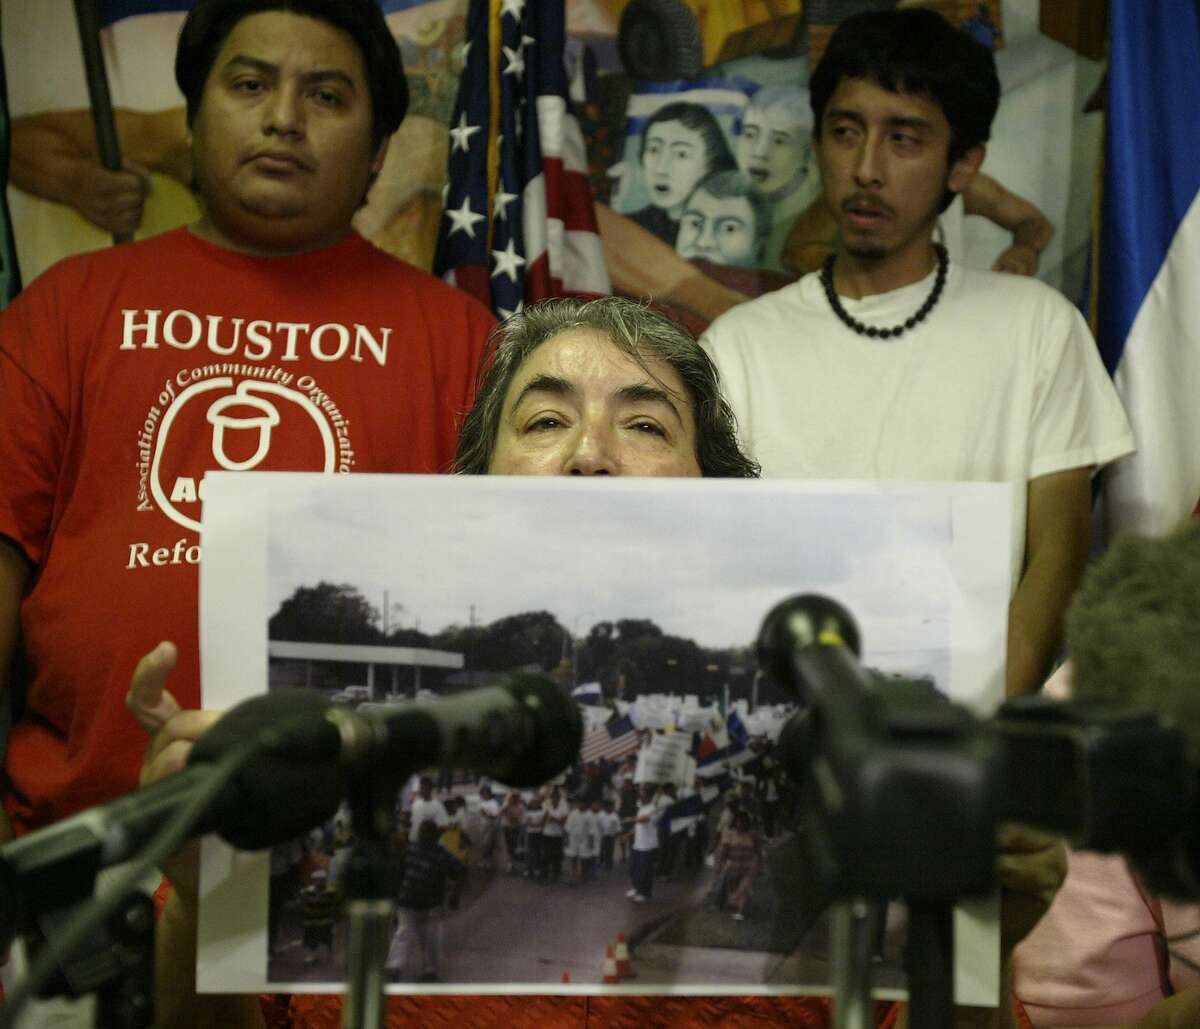 Maria Jimenez holds up a photo of a previous protest to demonstrate the number of people that CRECEN could get together to combat the Minutemen as she speaks during a press conference put together by CRECEN (Centro de Recursos Centroamericanos, Friday afternoon, July 8, 2005, to talk about their plans to deal with the Minutemen, who plan on photographing and video taping immigrants who hang out waiting for work on the street corners in Houston. (Karen Warren/Houston Chronicle) HOUCHRON CAPTION (07/09/2005) SECNEWS: TURNING OUT: Maria Jimenez on Friday holds up a photo of a previous protest to demonstrate the crowd that the Central American Resource Center could draw to counteract the Minutemen. "For every Minuteman patrolling, we will have at least 10 people patrolling them," she said.